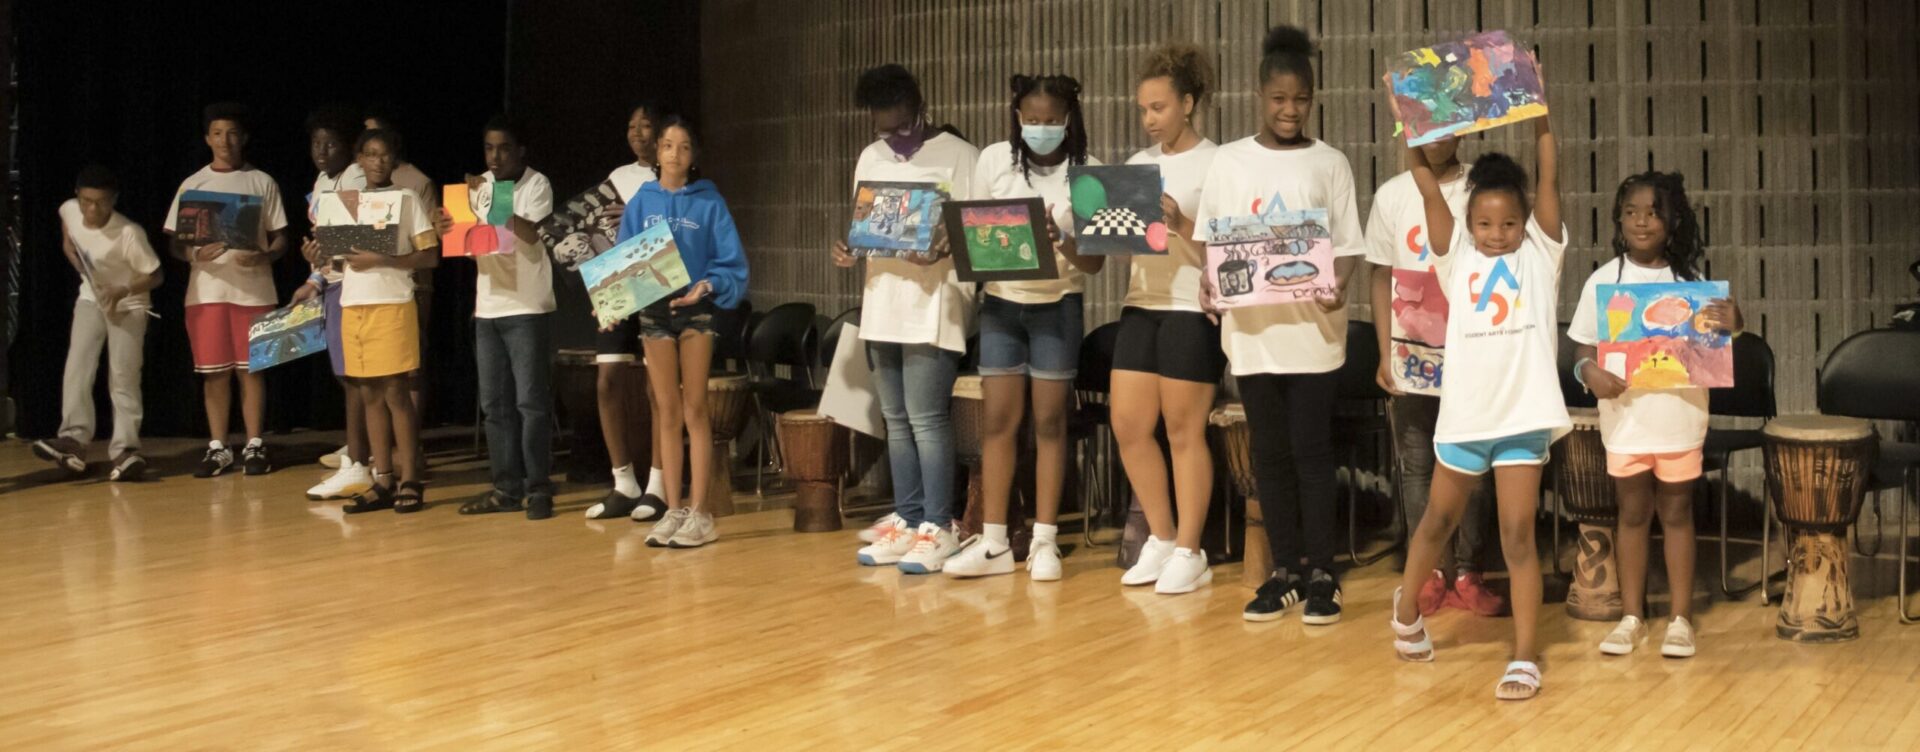 A group of young people holding up boxes.